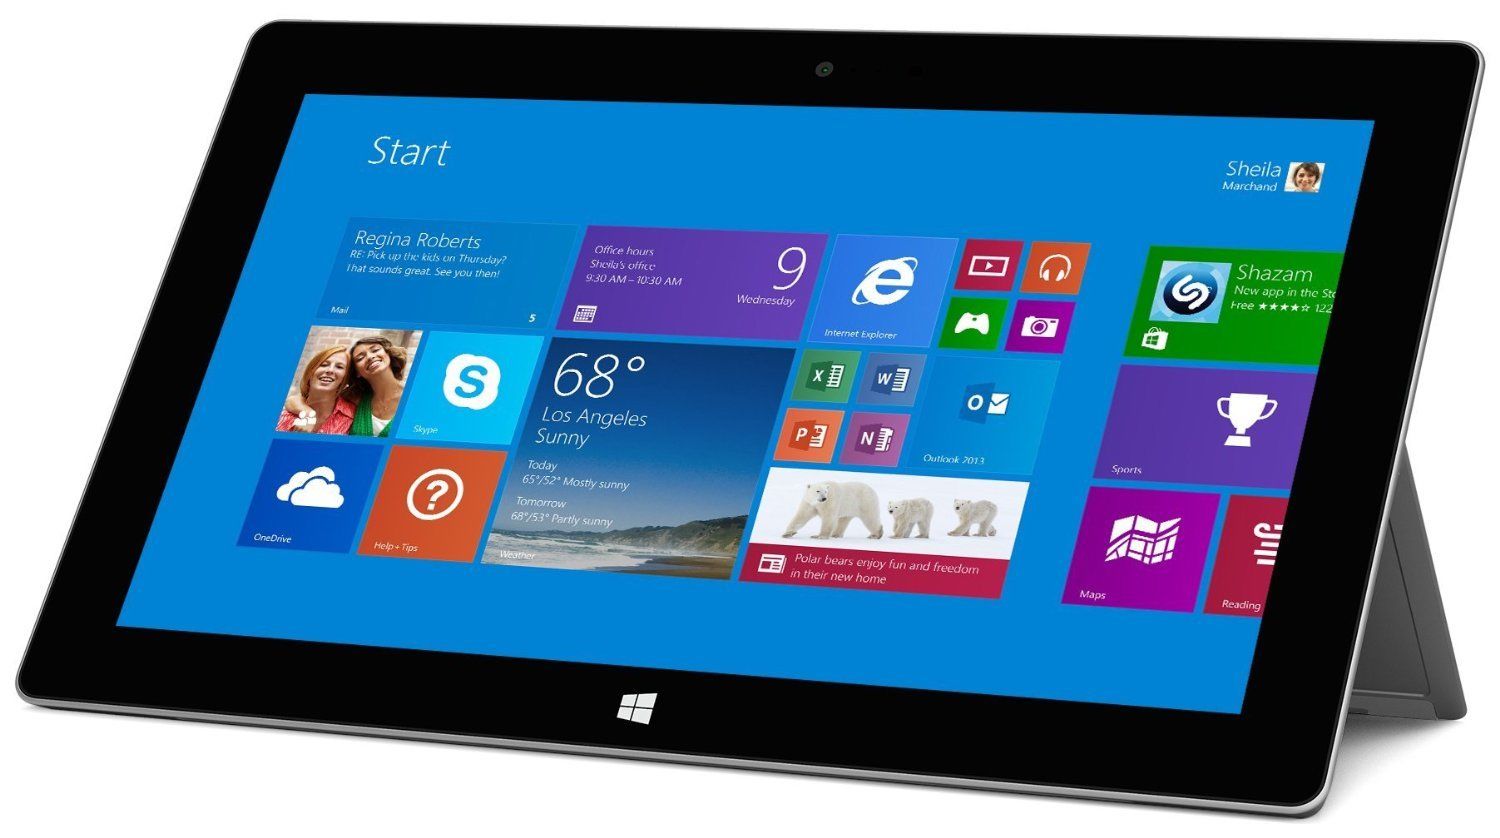 Microsoft Surface 2 Tablet, 10.6" Full HD, Cortex A15 Quad-core (4 Core) 1.70 GHz, 2 GB RAM, 64 GB Storage, Windows 8.1 RT, Magnesium Silver - image 1 of 5